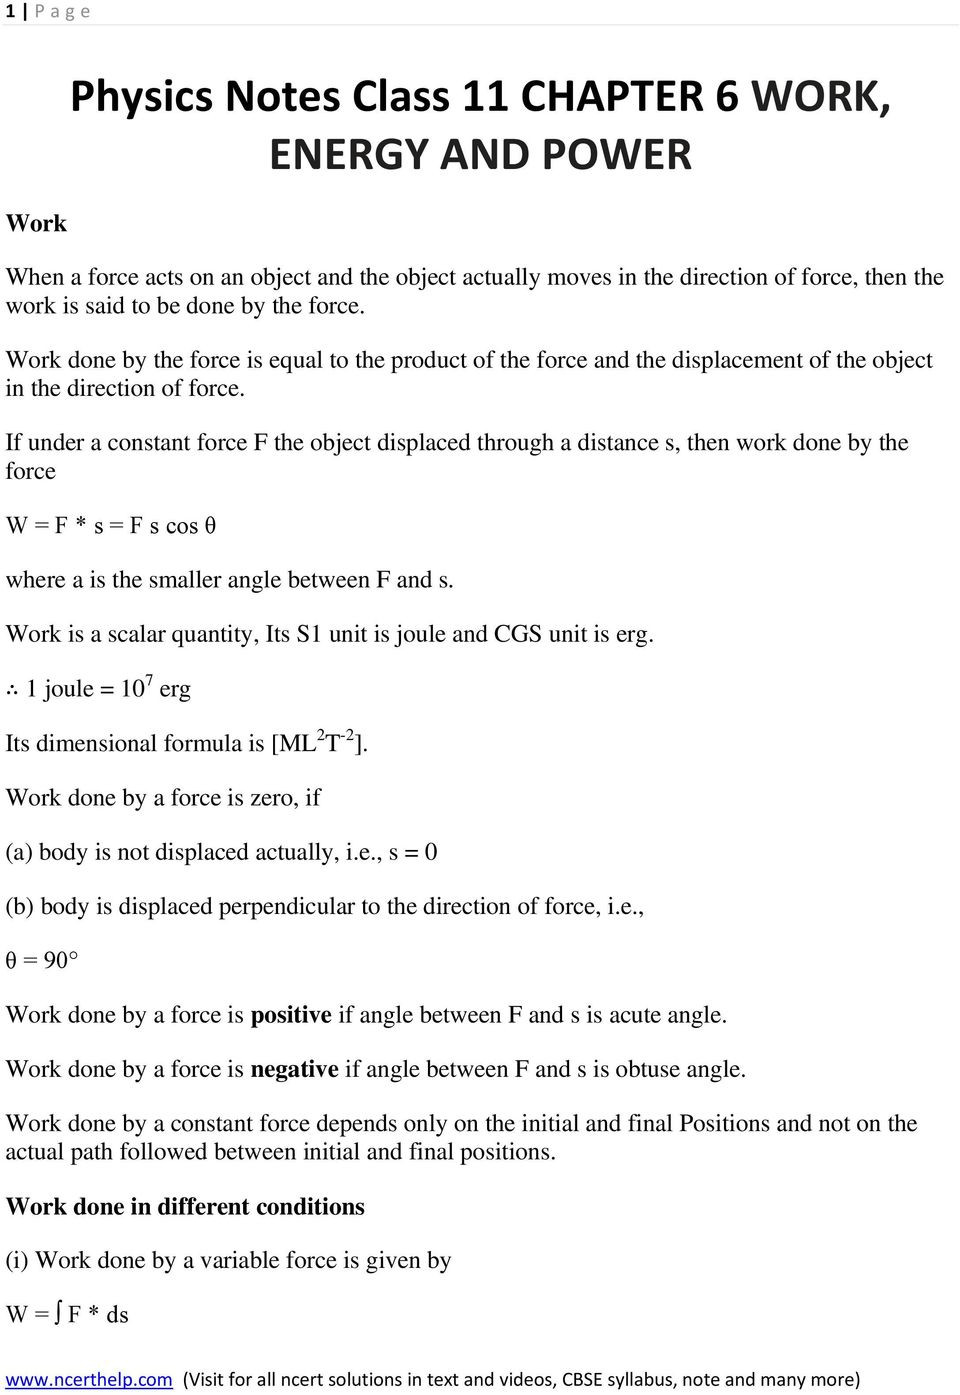 Work Power and Energy Worksheet Physics Notes Class 11 Chapter 6 Work Energy and Power